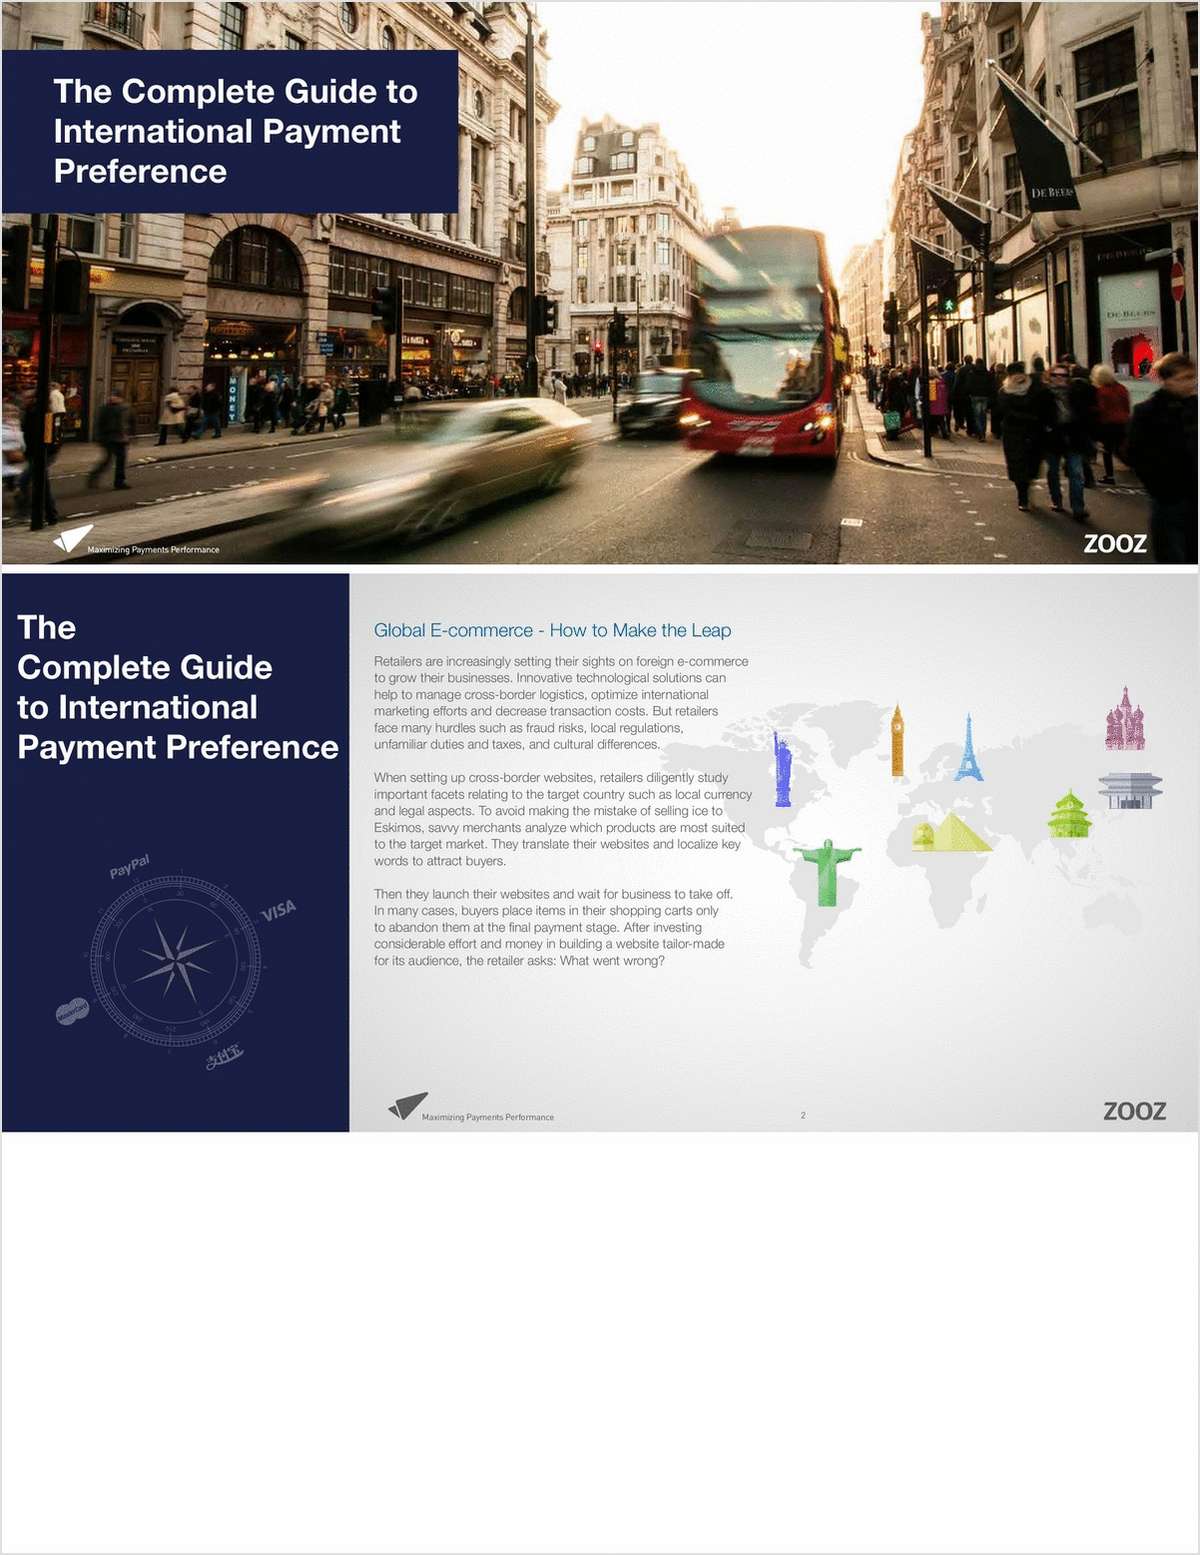 The Complete Guide to International Payment Preference